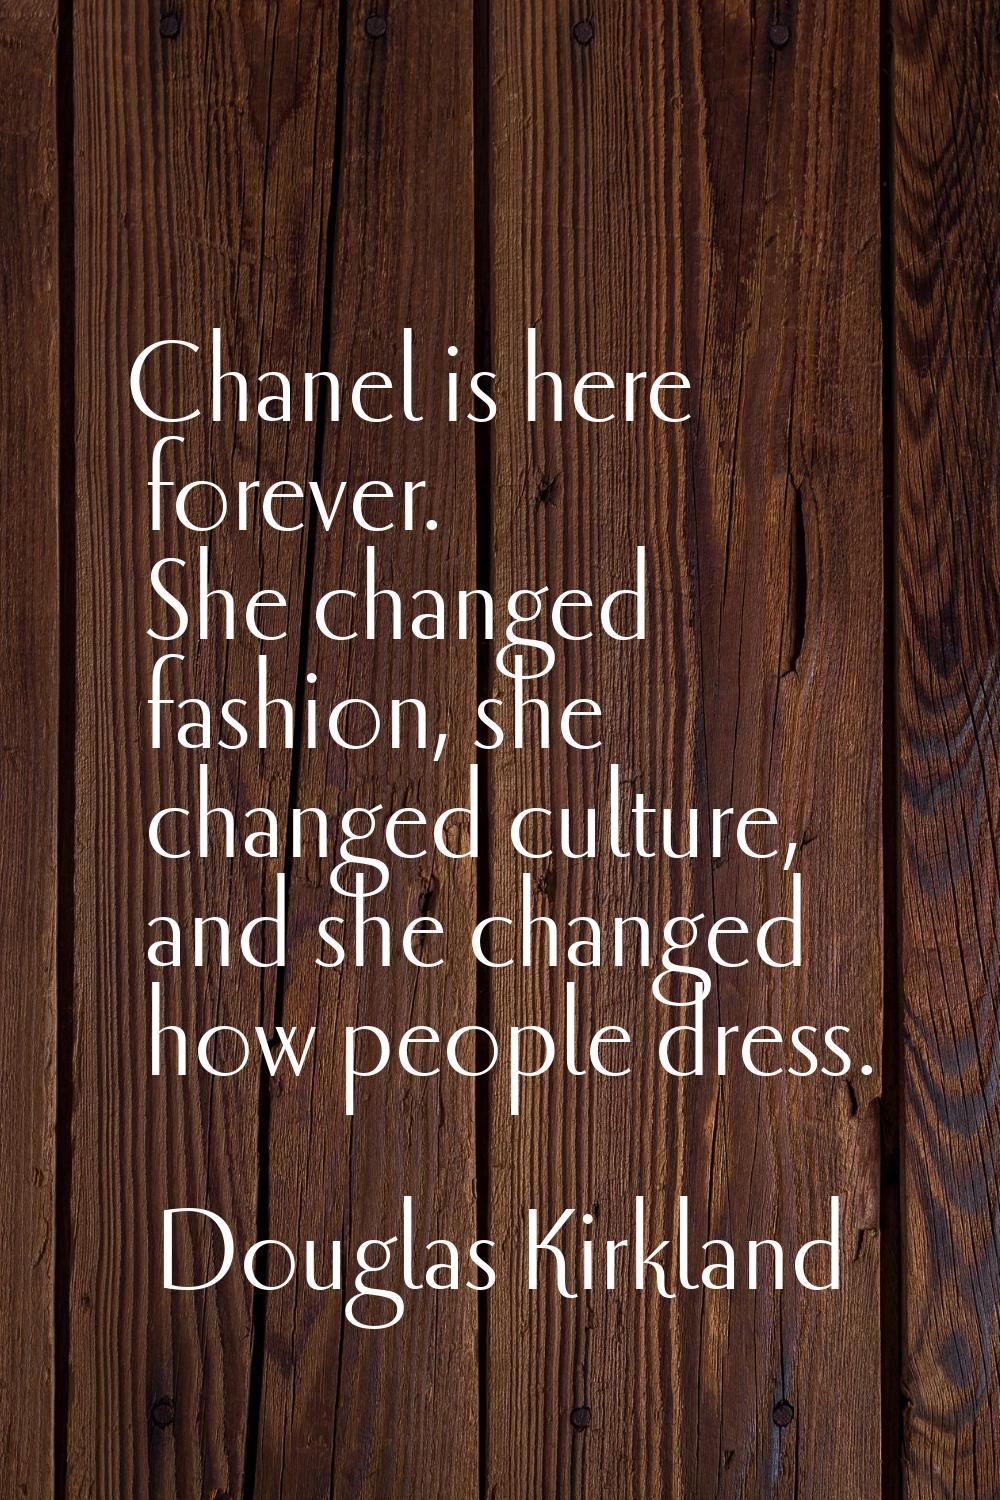 Chanel is here forever. She changed fashion, she changed culture, and she changed how people dress.